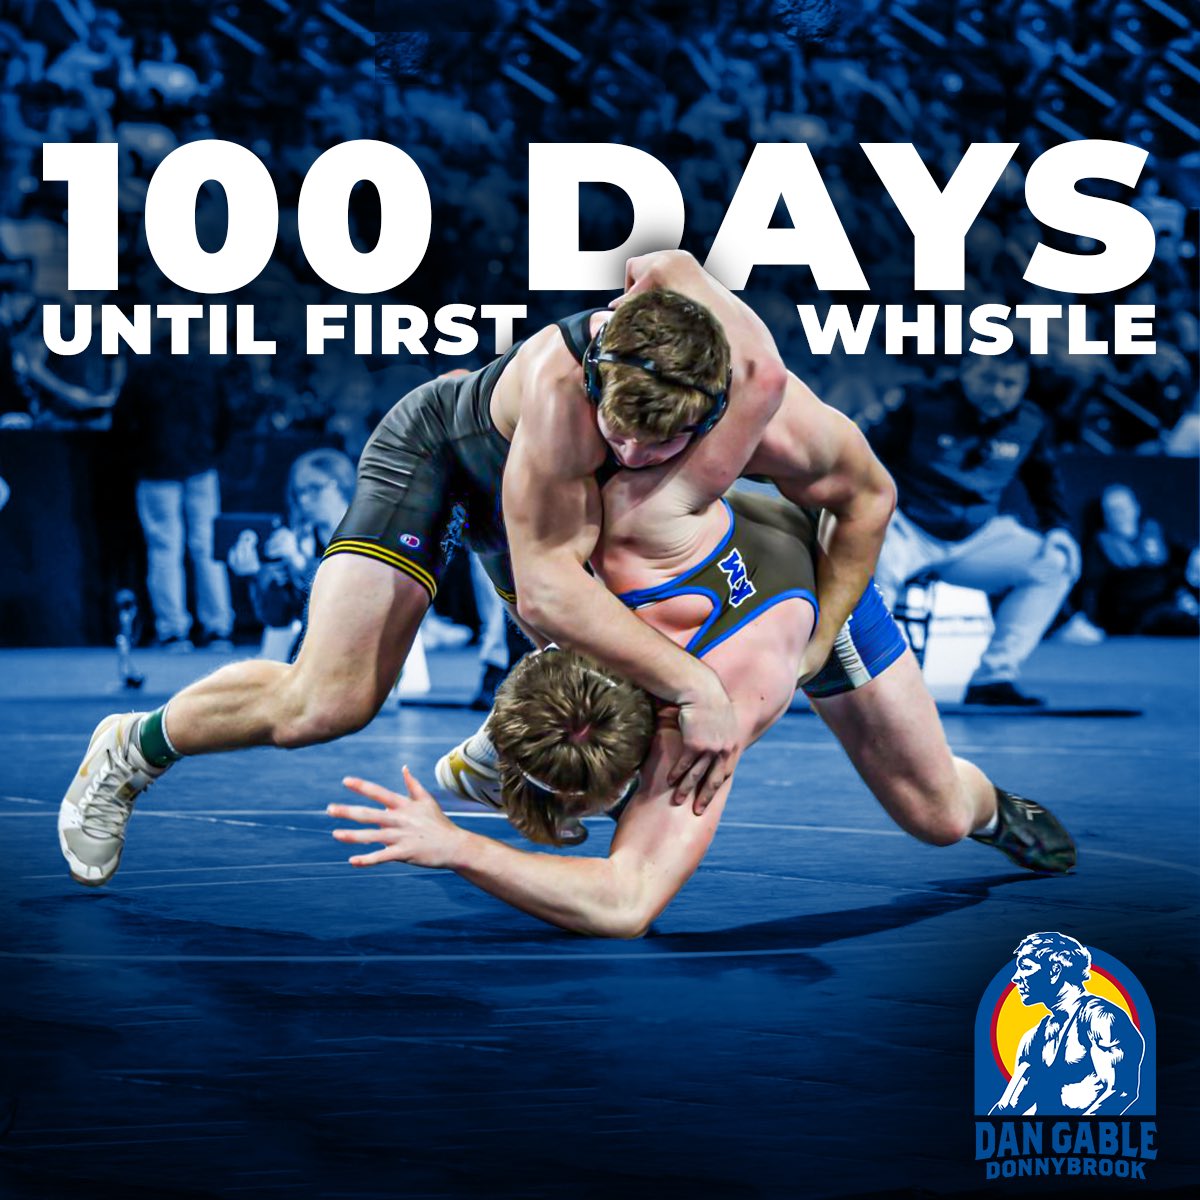 We are officially 100 DAYS away from the FIRST whistle of #donnybrookwrestling 🙌 Can’t wait to watch the best girls & boys compete here in Coralville! 🔥 #donnybrookwrestling #donnybrookathlete #wrestlingtownusa